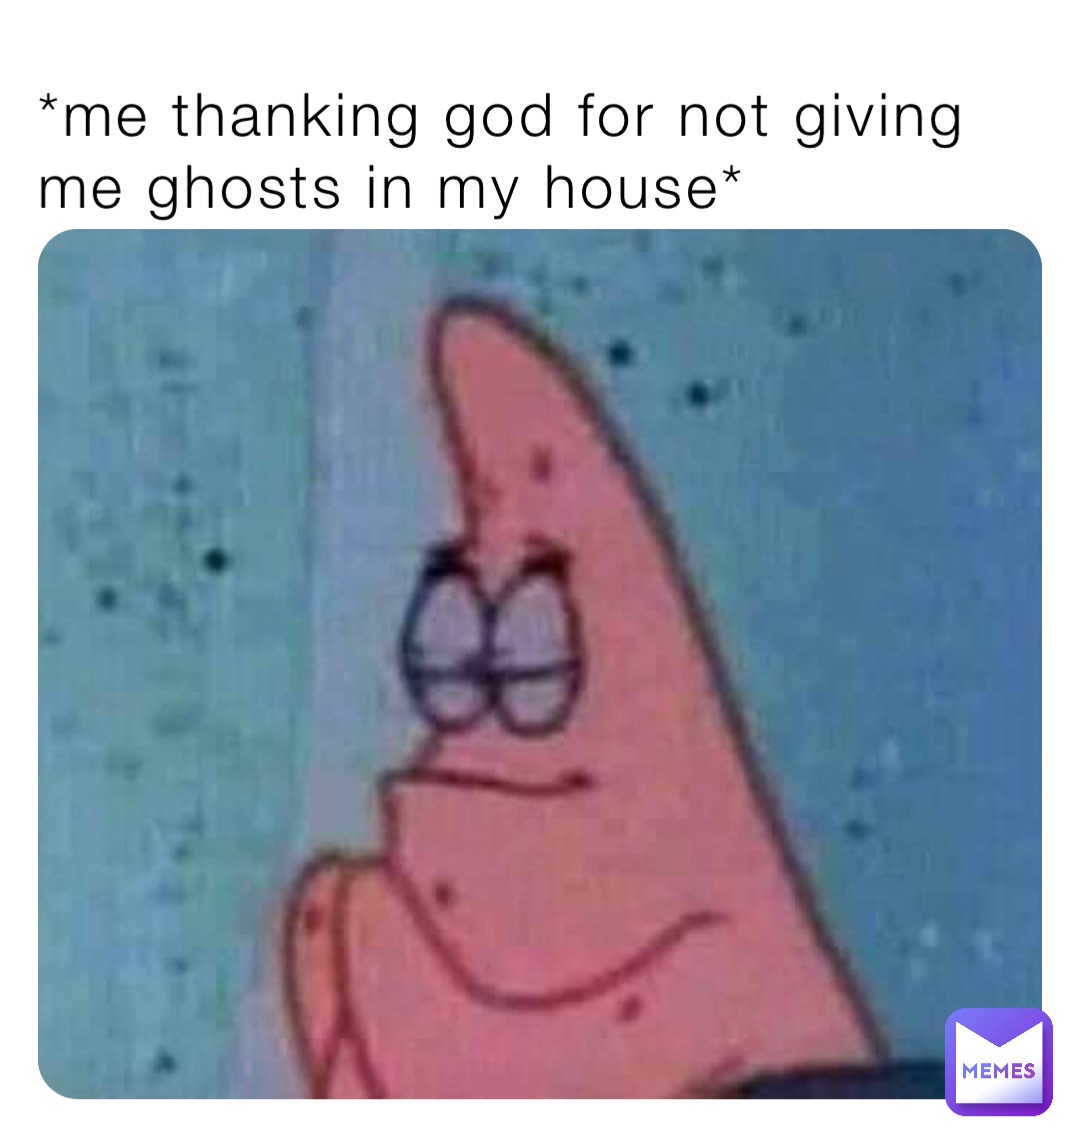 *me thanking god for not giving me ghosts in my house*